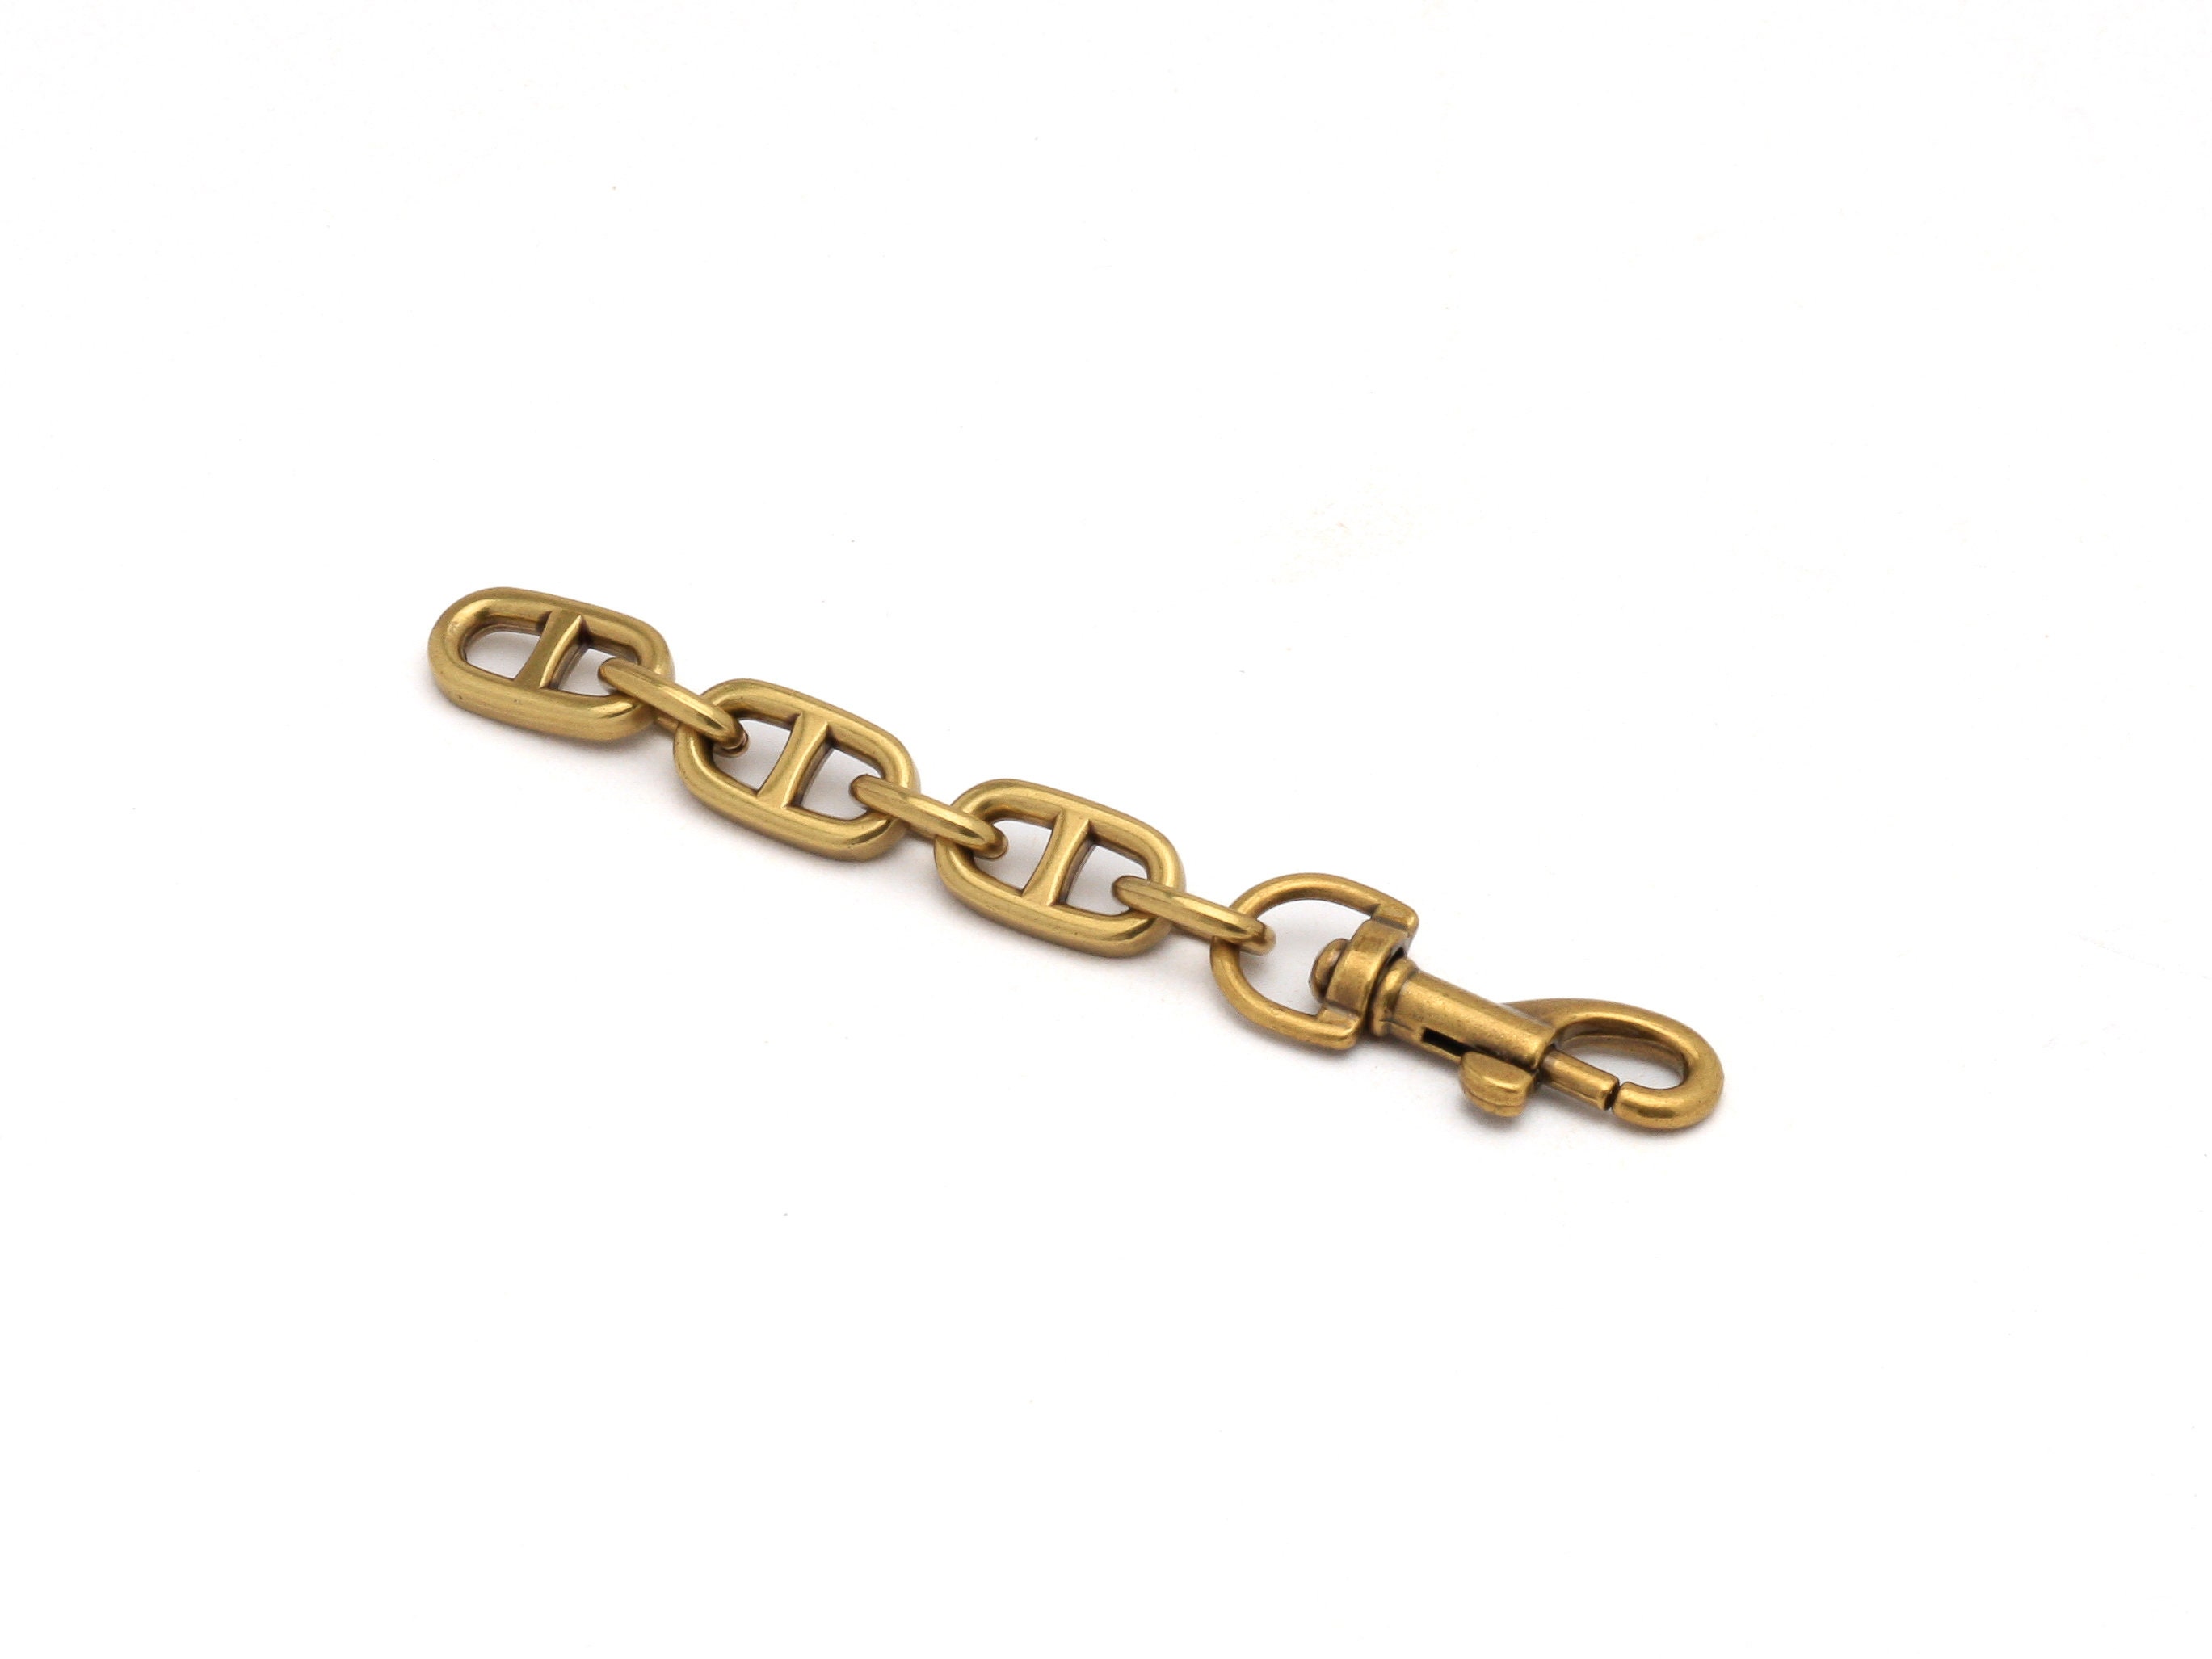 Strap Extender or Key Tether Fancy Cuban Link Chain With Swivel